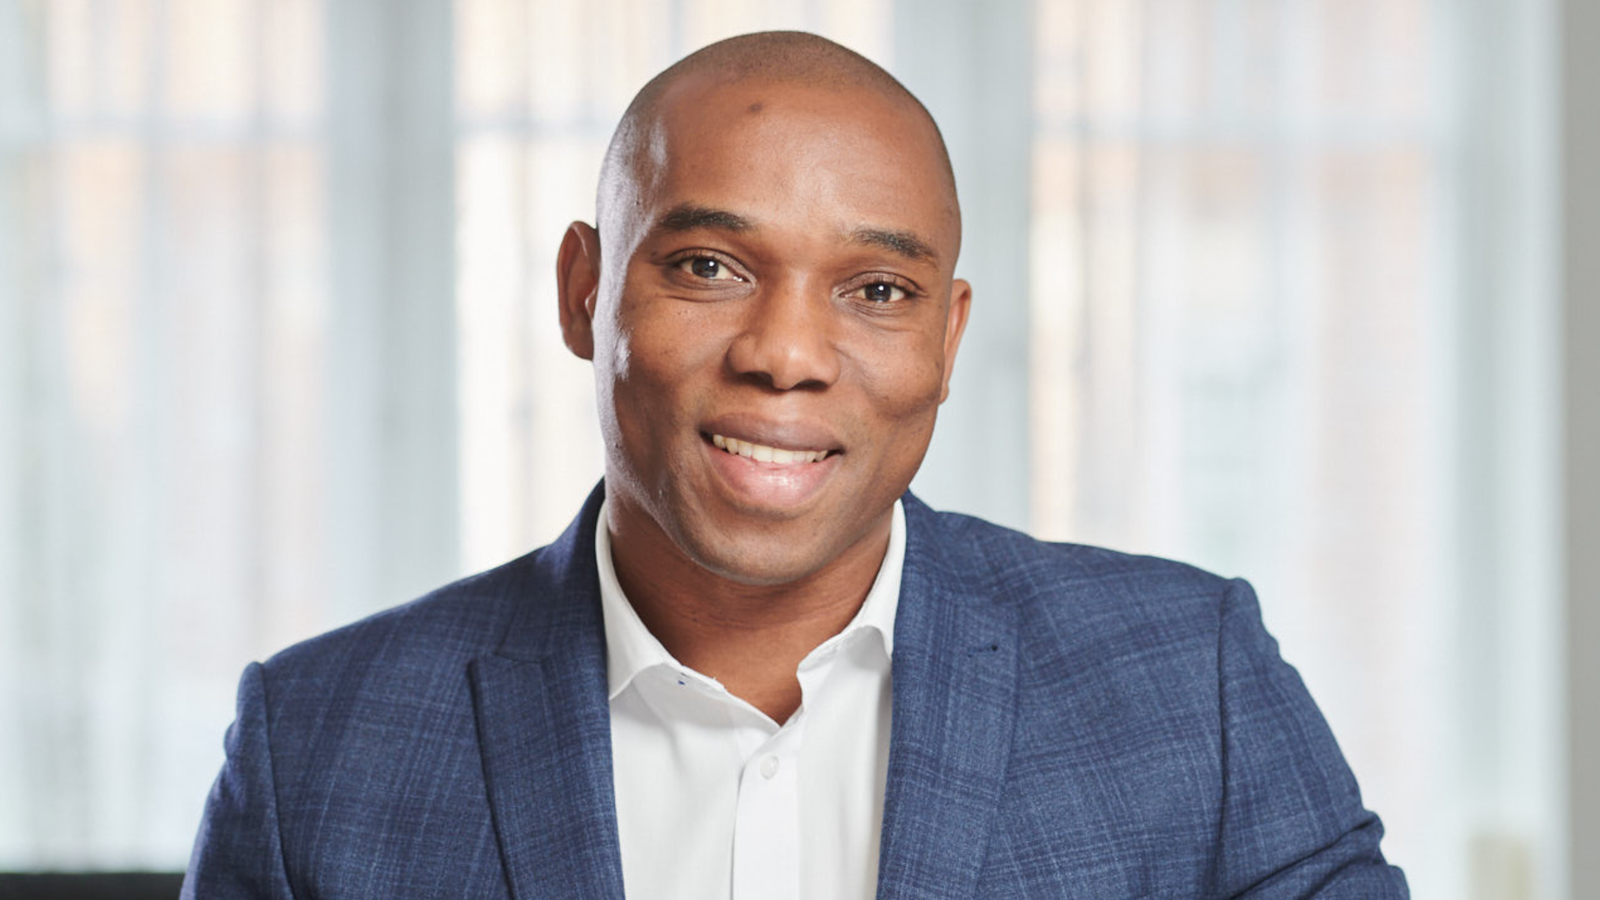 Kick it Out has announced former NatWest executive director Samuel Okafor will take over as its chief executive next month